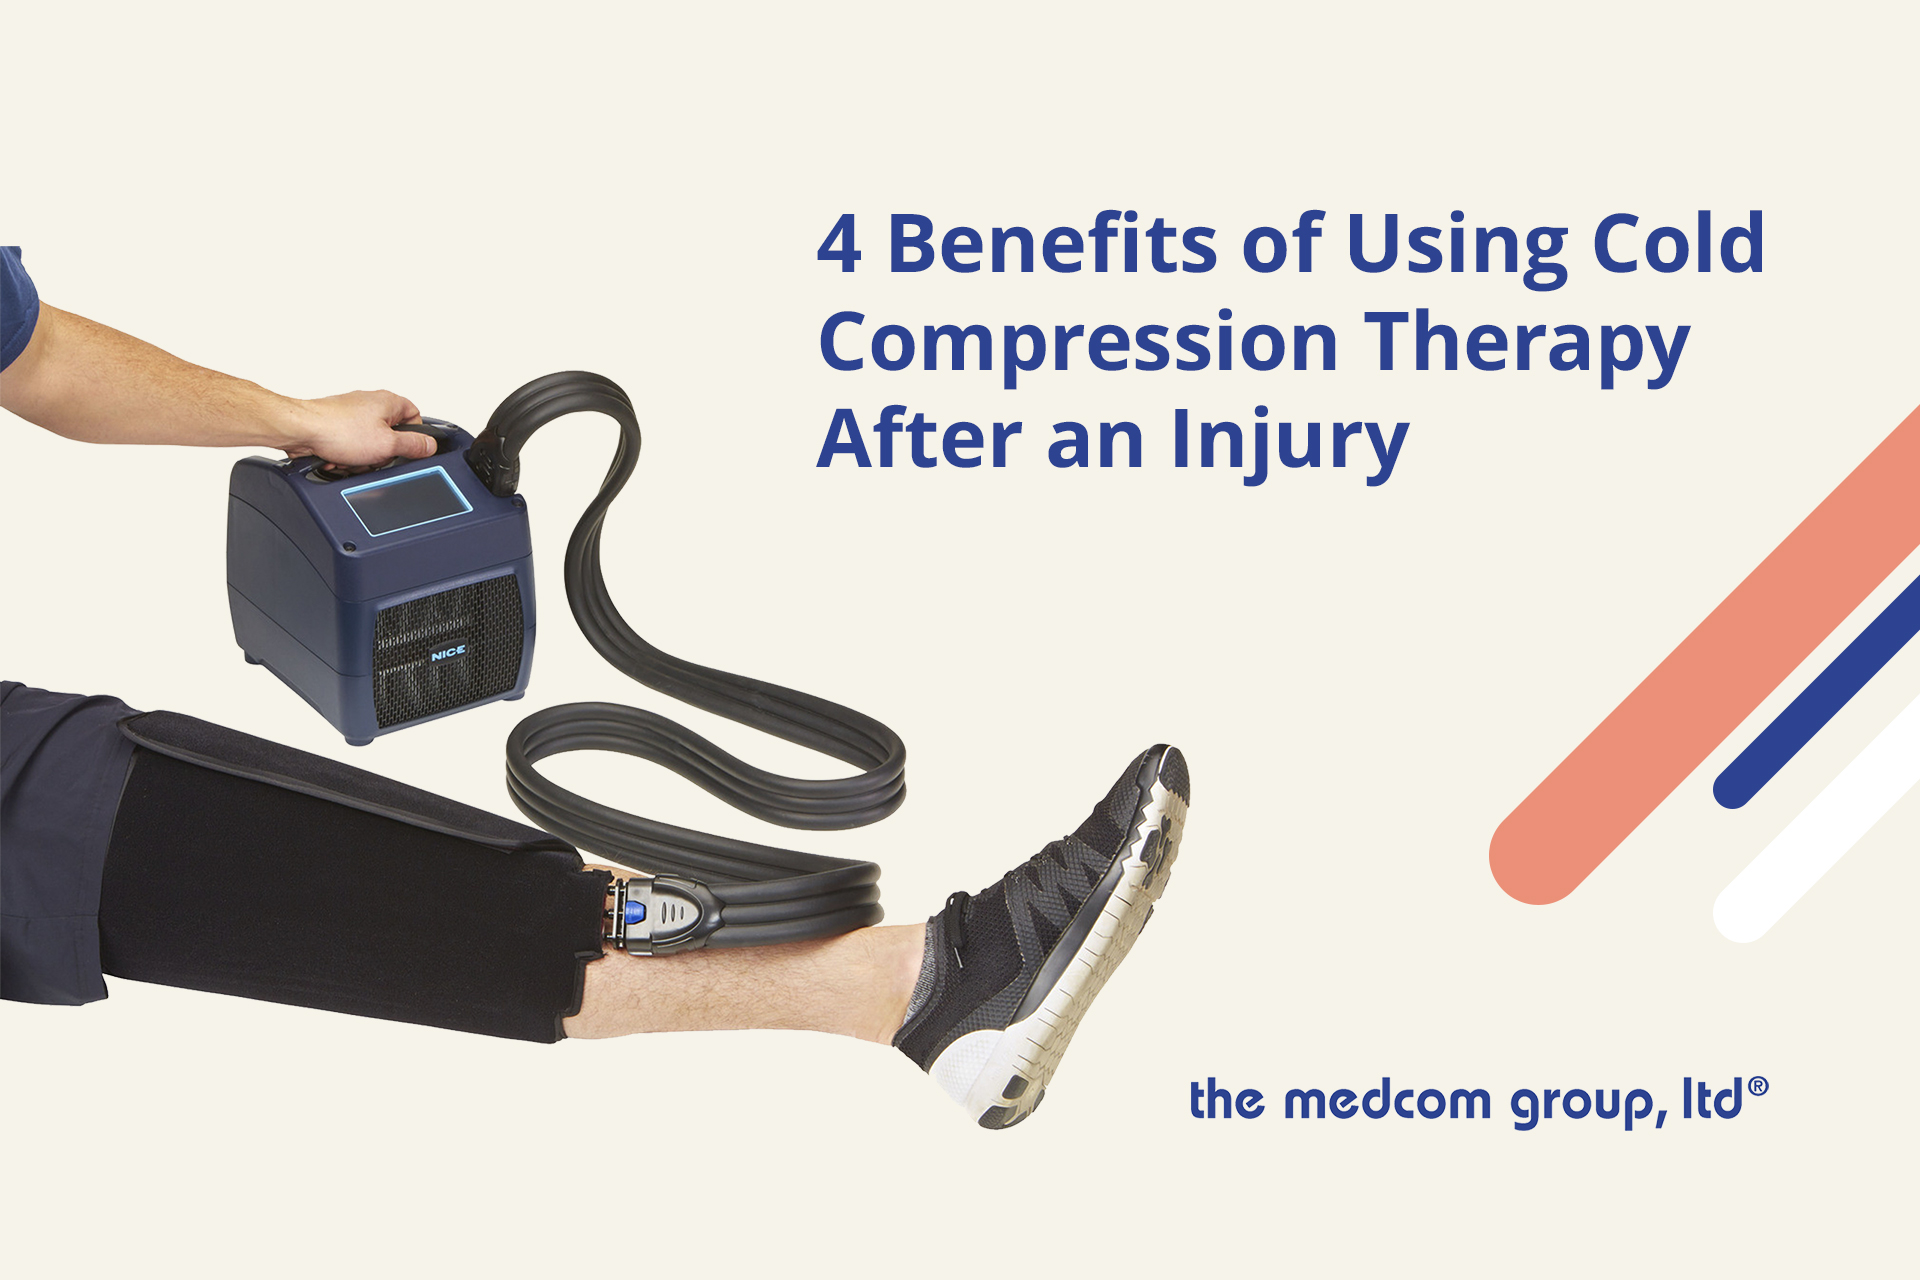 https://www.medcomgroup.com/product_images/uploaded_images/-four-benefits-of-using-cold-compression-therapy-after-an-injury.jpg